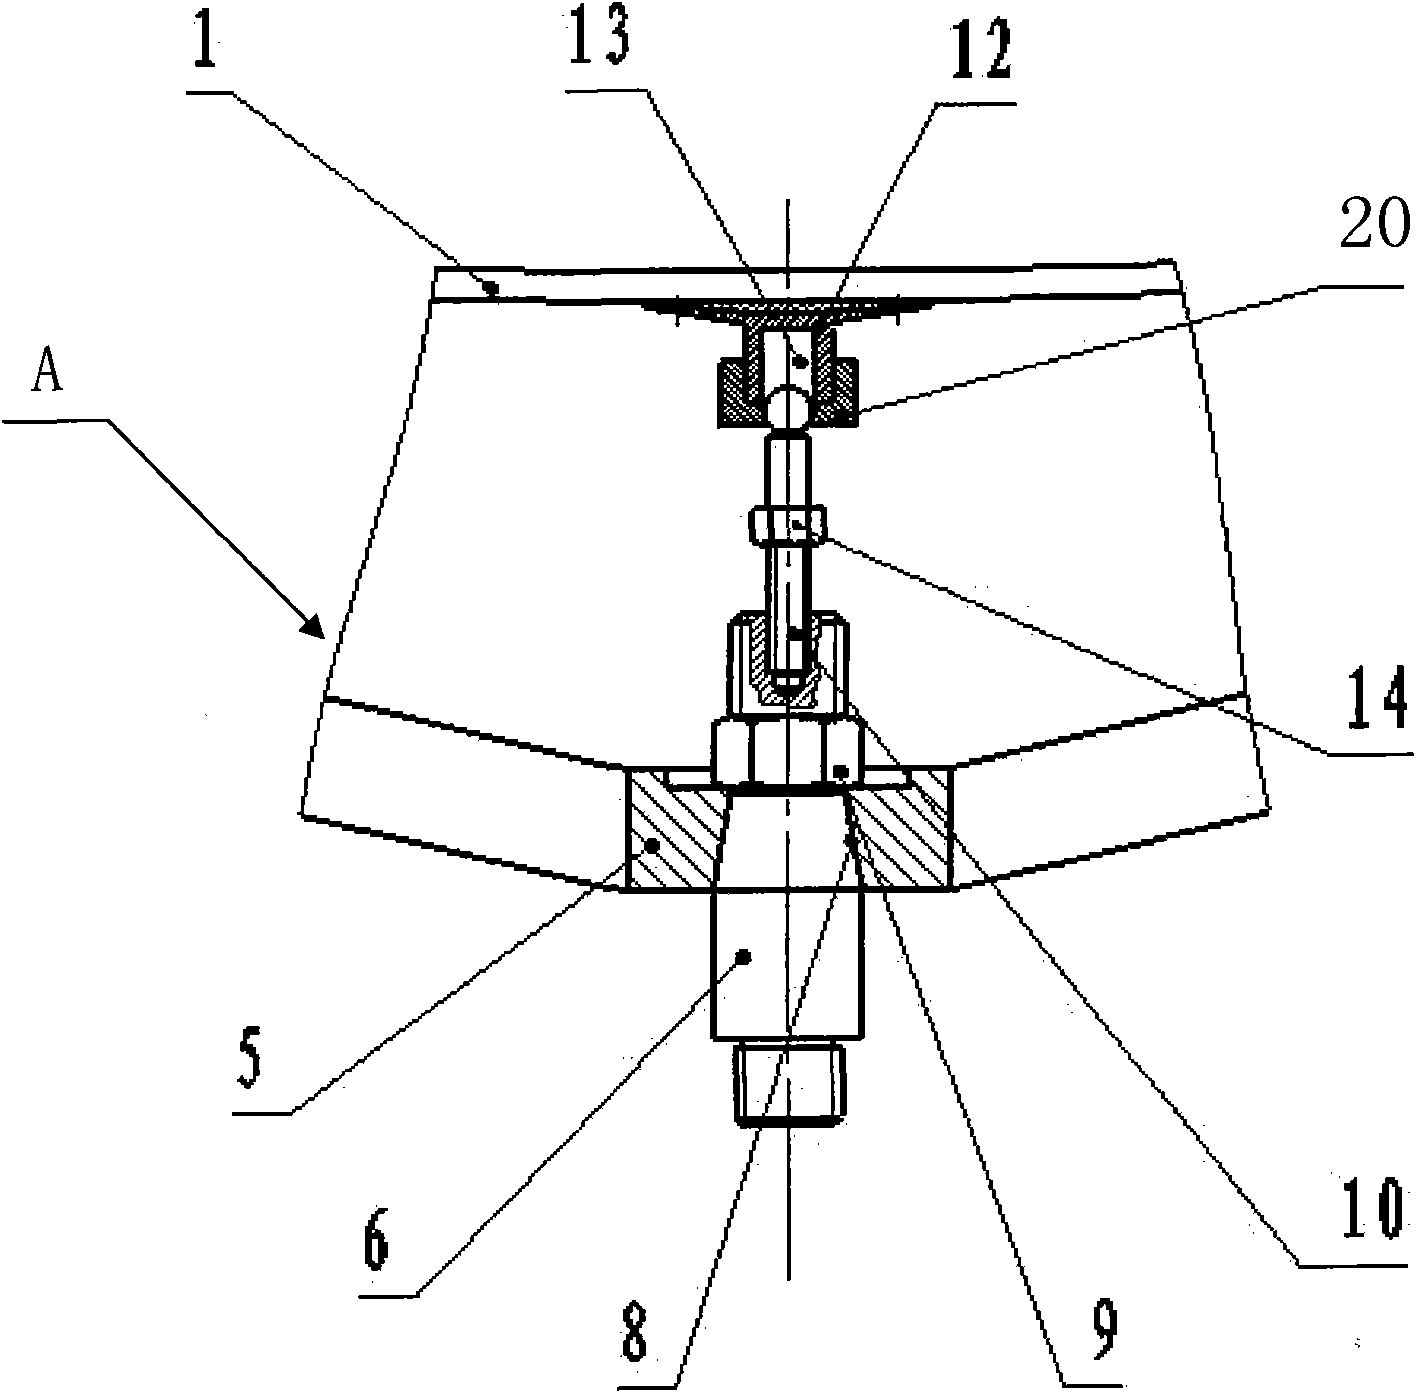 Supporting and adjusting device applied to reflecting mirror of heliostat